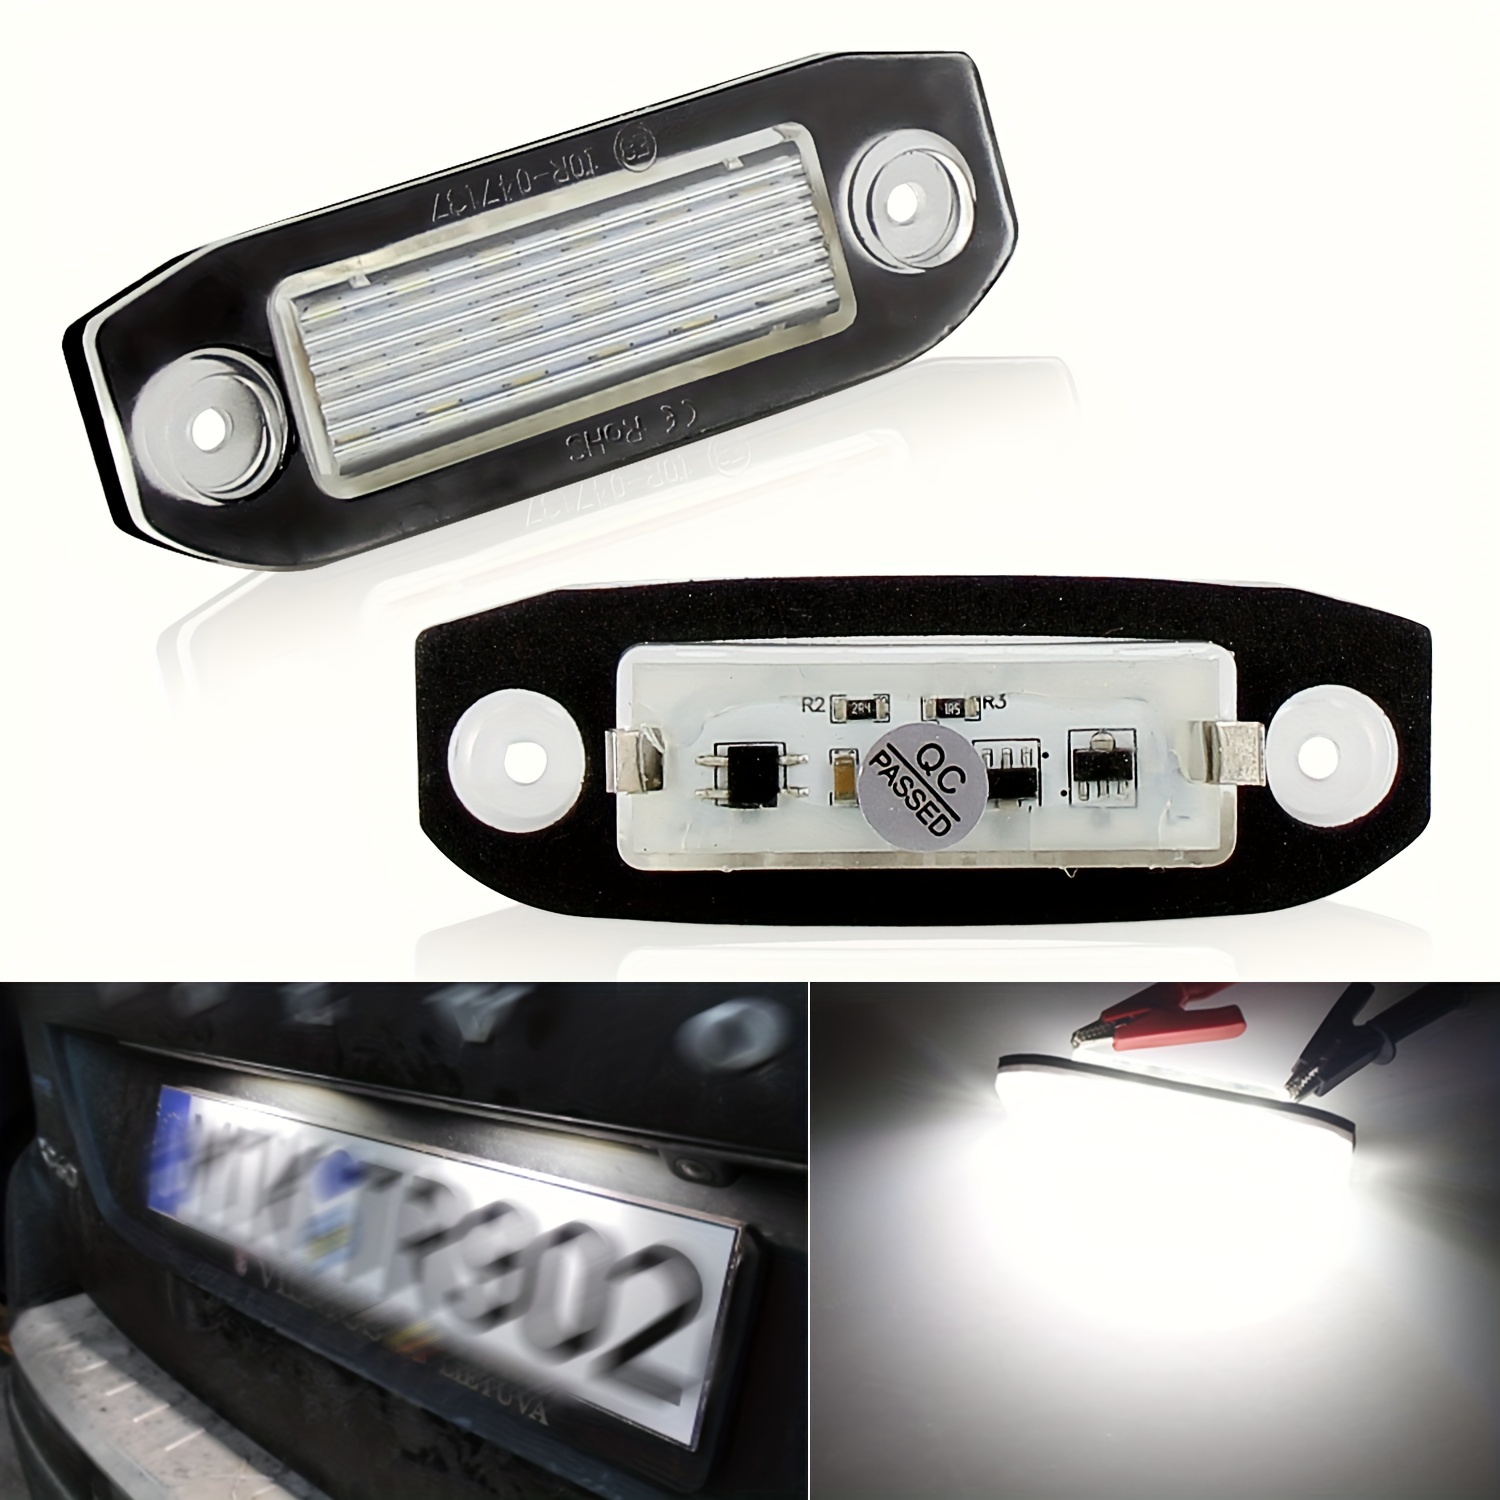  LED License Plate Lights Replacement for 2009-2017 Volvo XC60  2003-2014 XC90 S60 Xenon White 18-Led Number License Plate Lamps Bulb OEM  Fit Canbus Error Free : Automotive